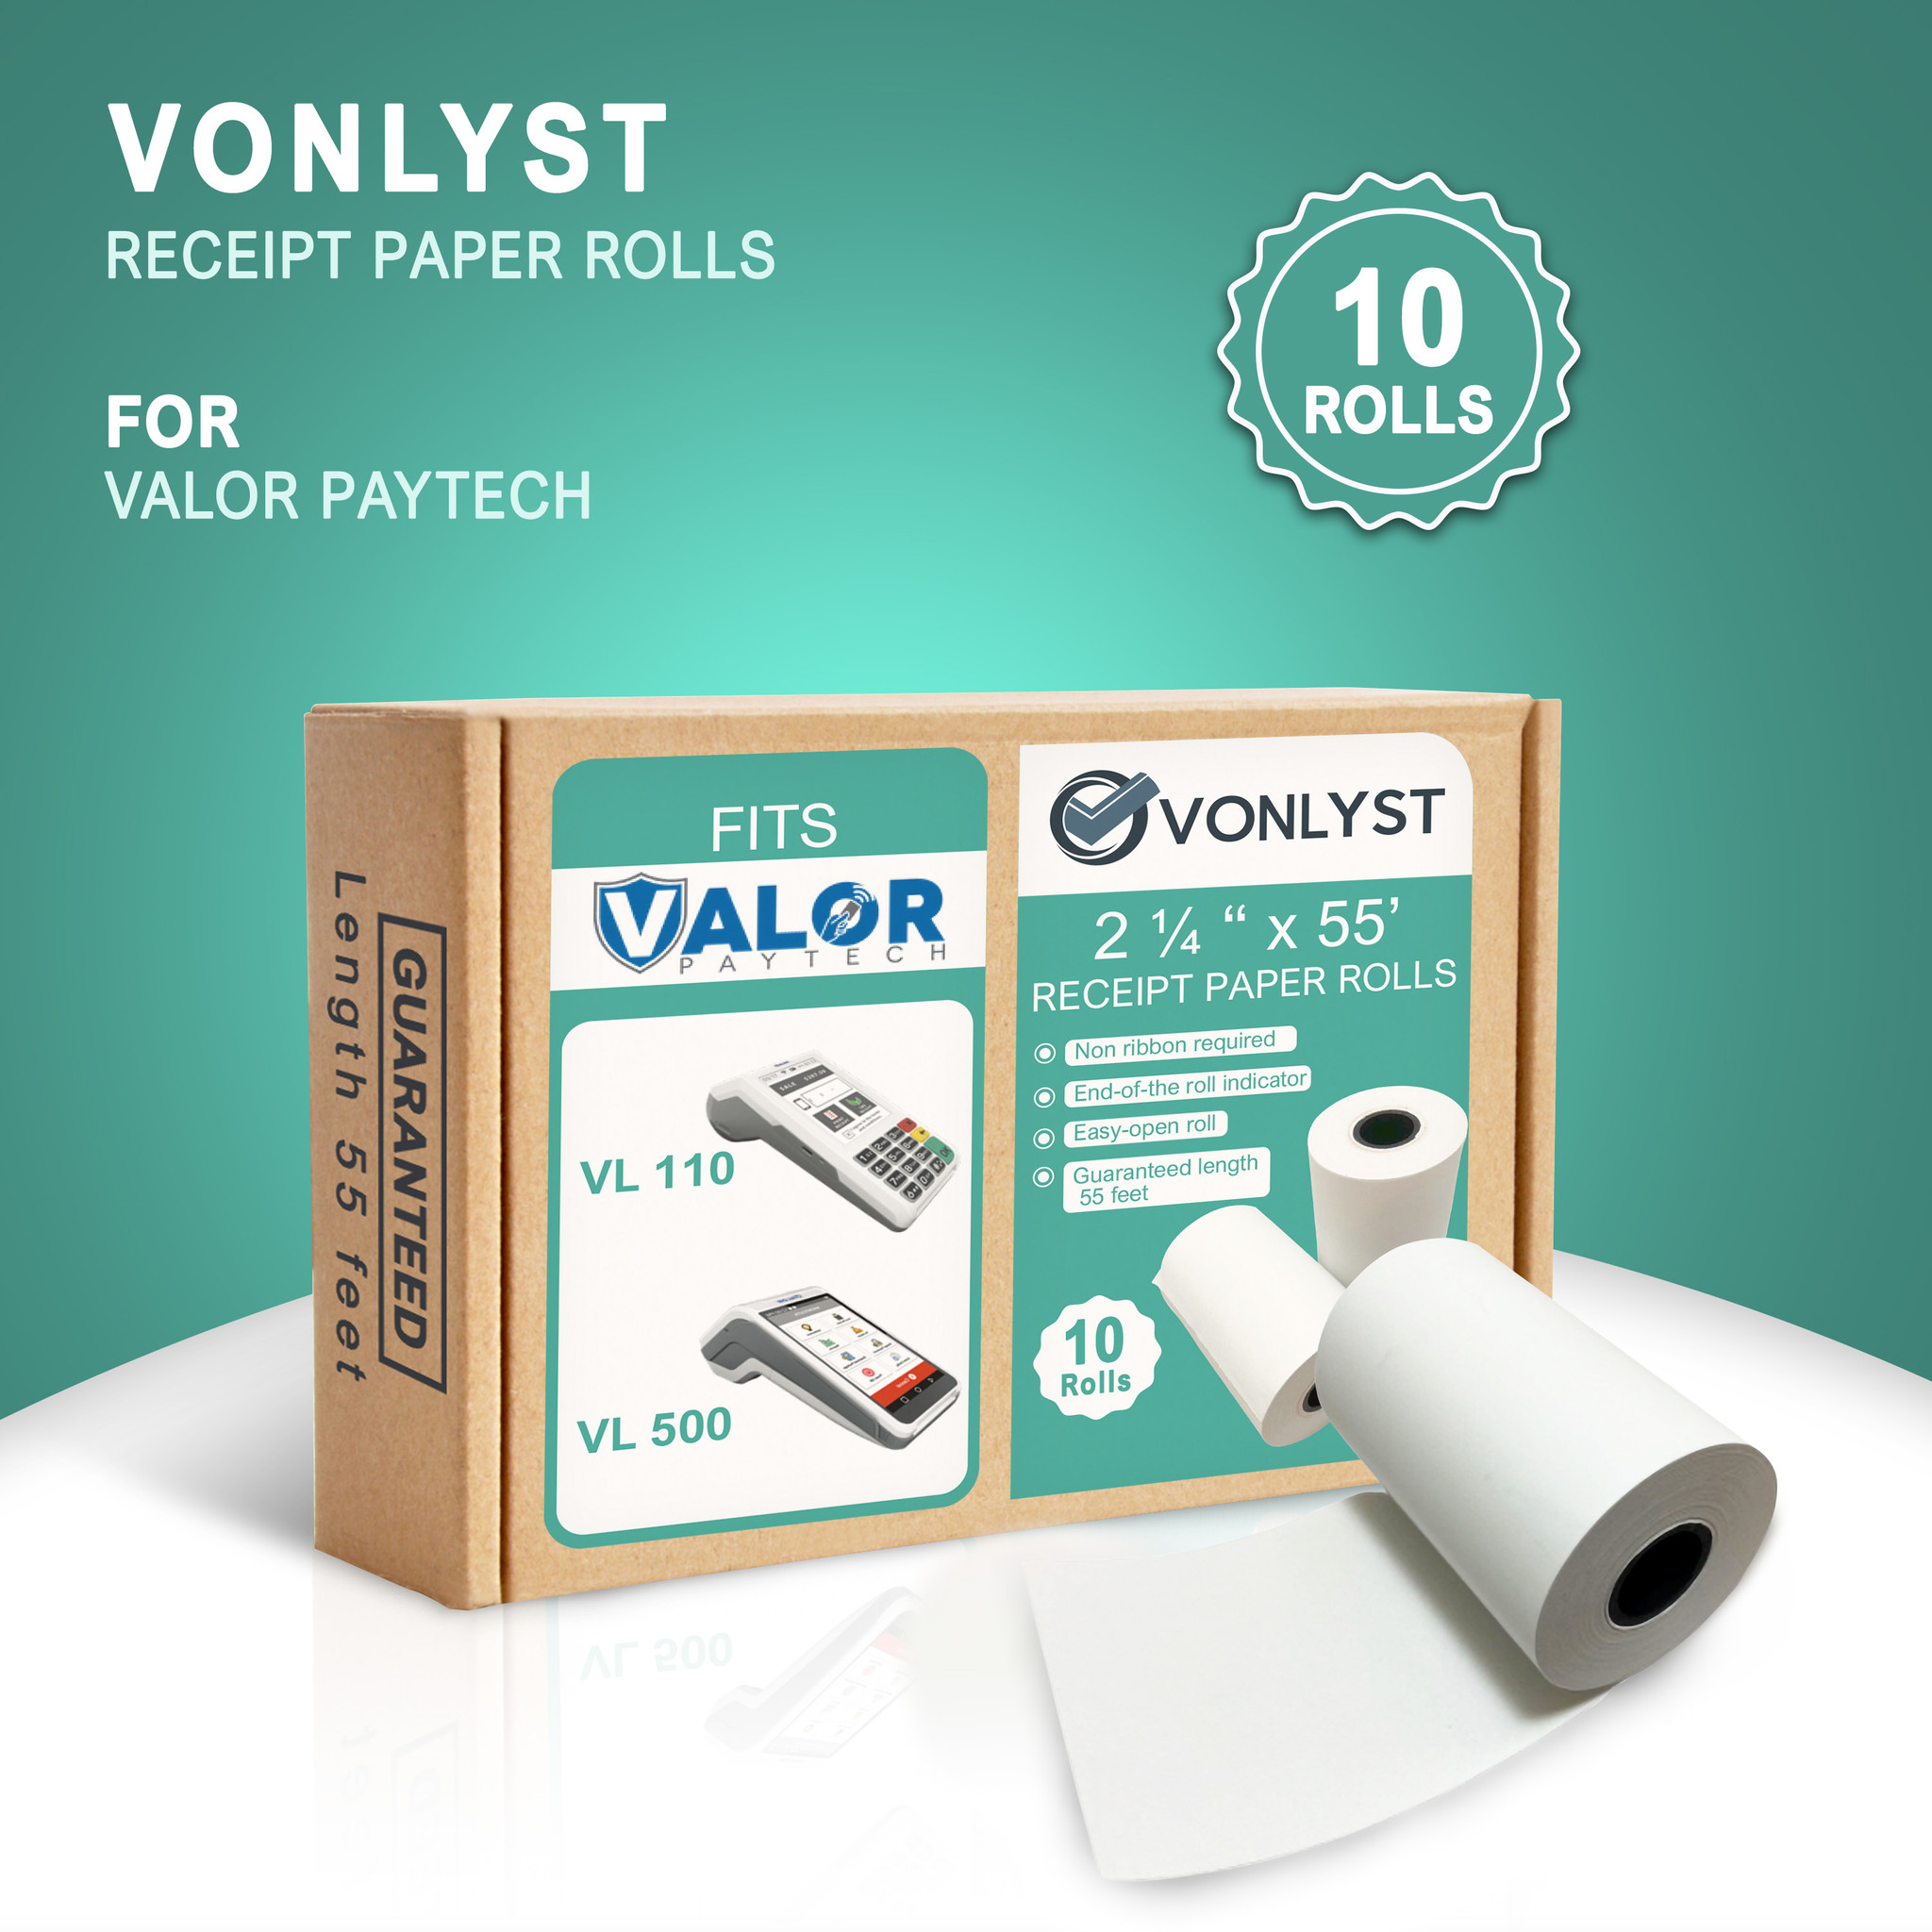 Receipt Paper Roll for Valor Paytech VL110 and VL500 (10 rolls)